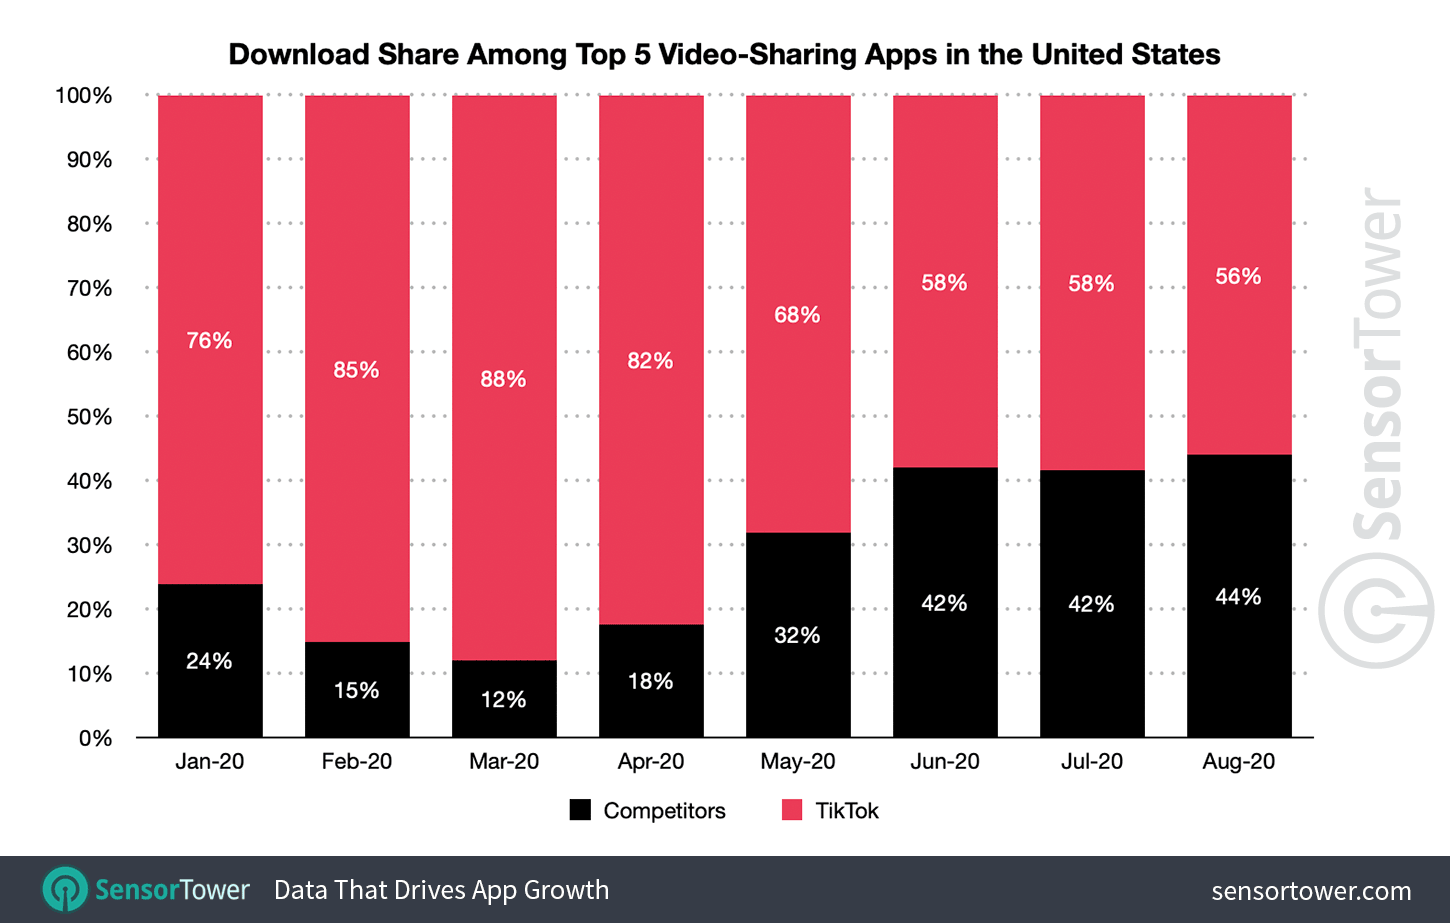 TikTok’s competitors capture 44% share of the US video-sharing app installs in August